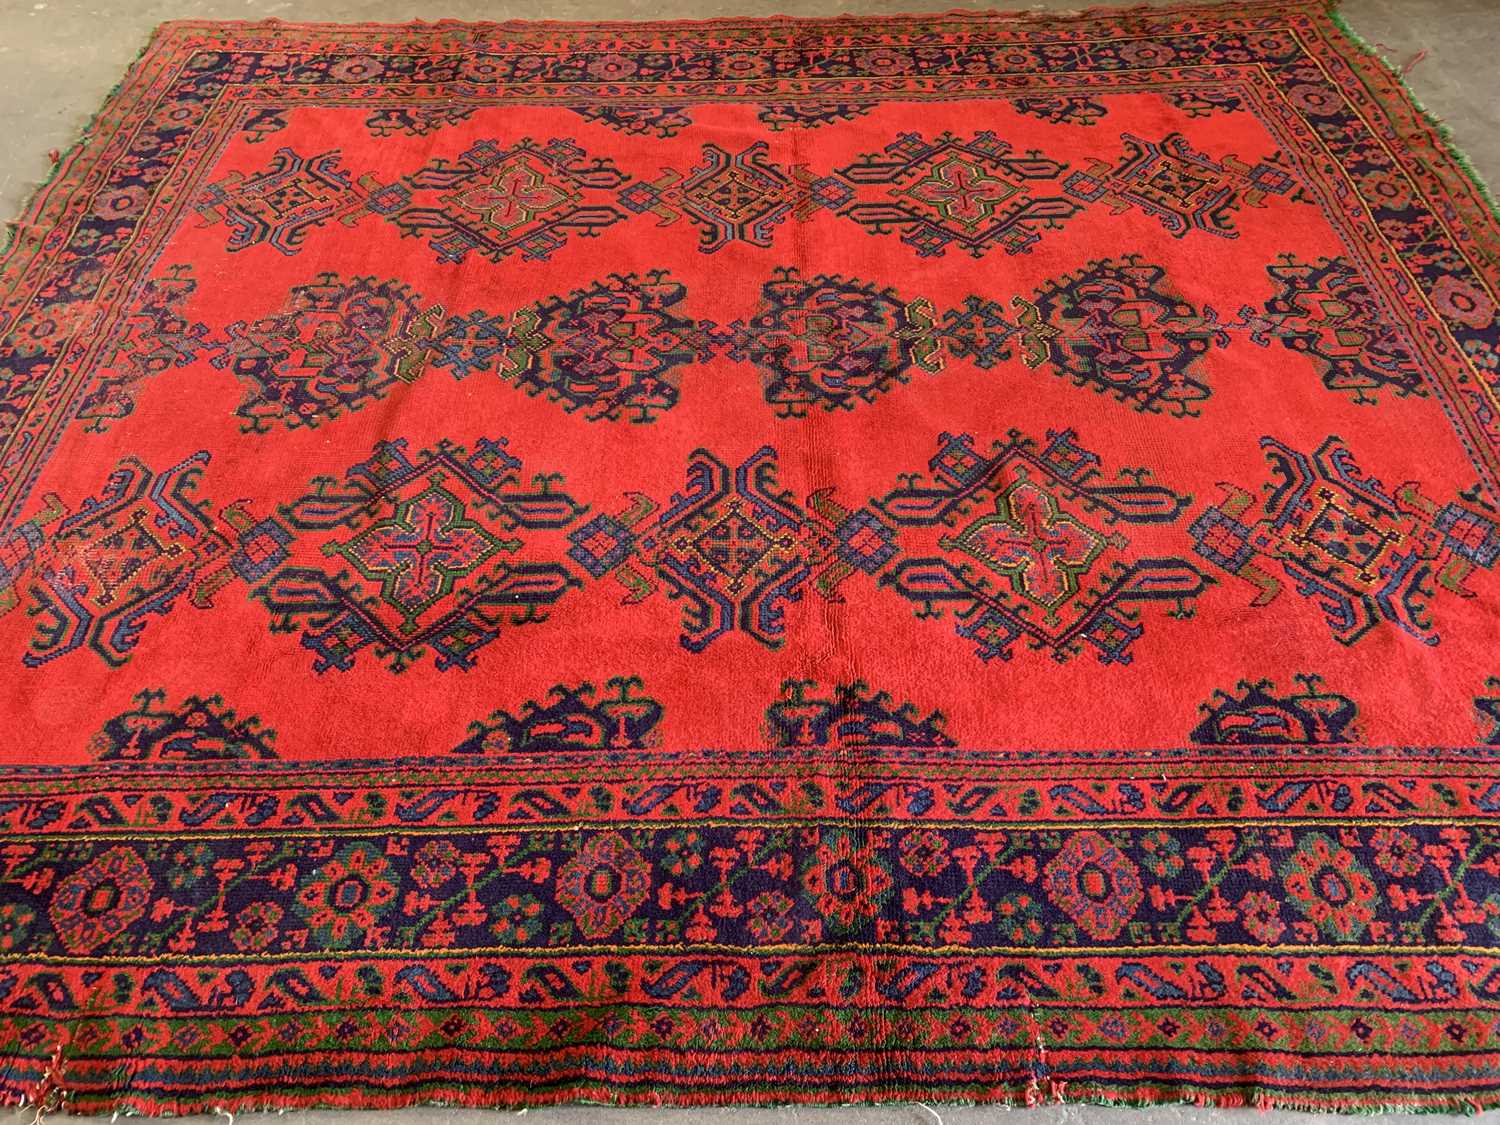 EASTERN STYLE WOOLLEN RUG, red ground with blue border and central repeating pattern, 341 x 294cms - Image 2 of 3